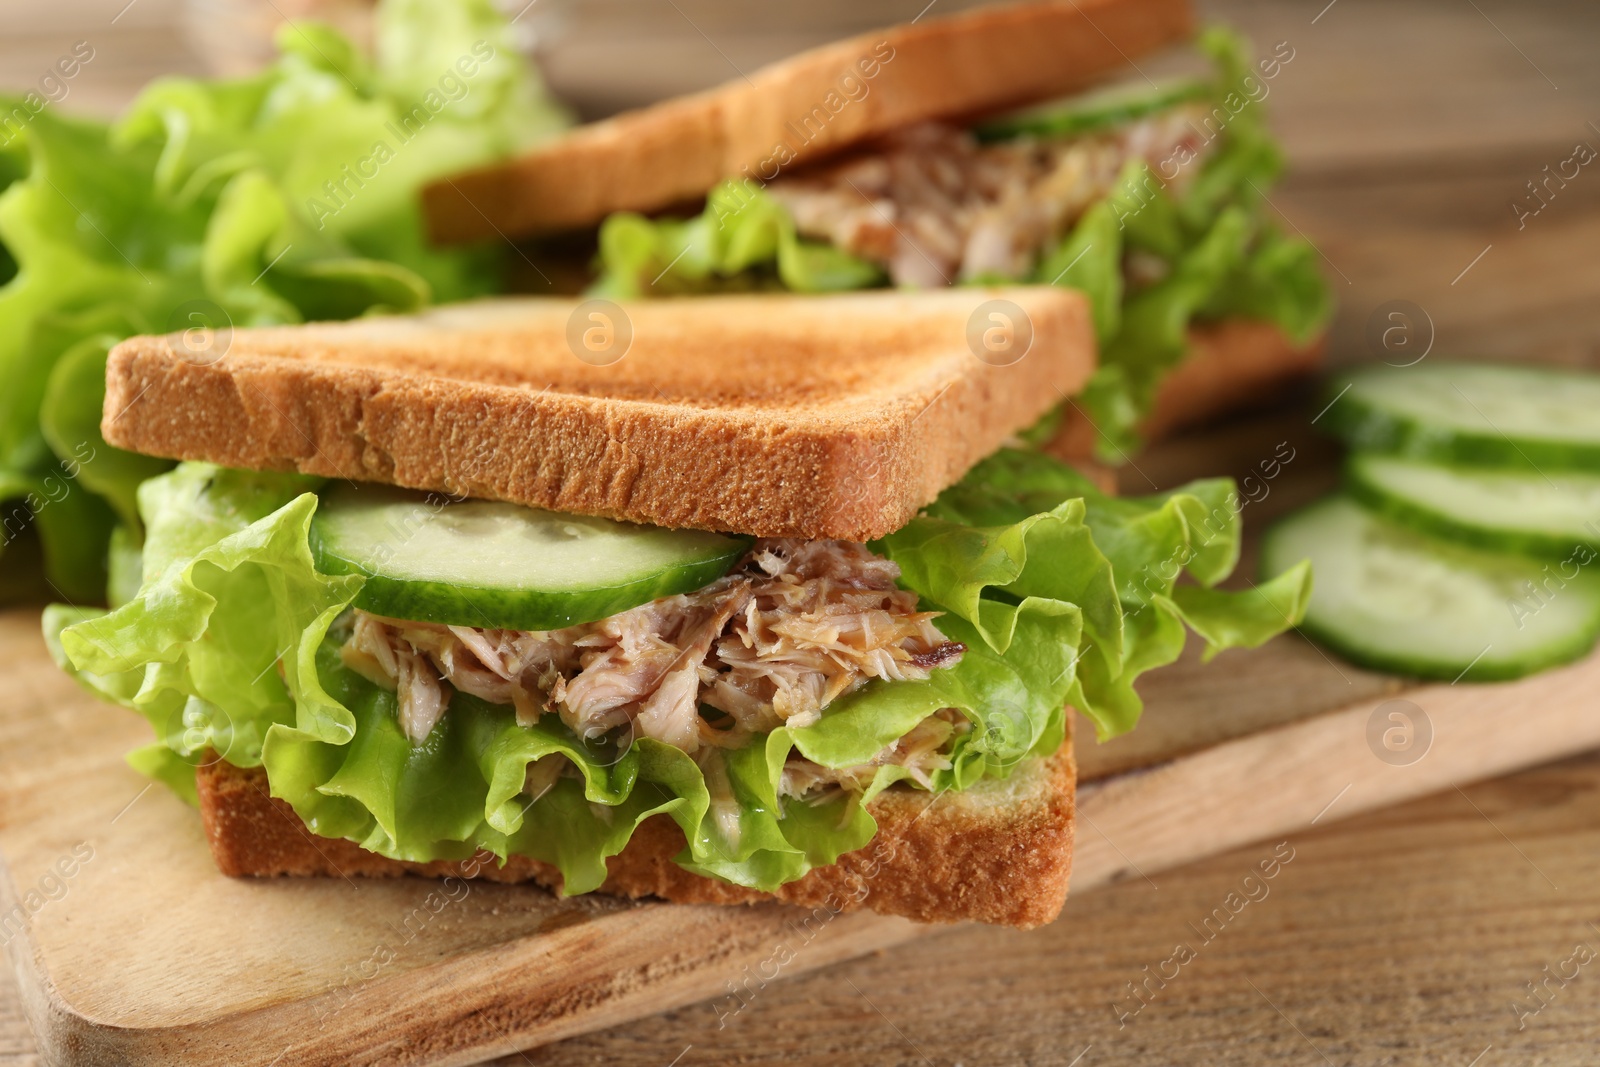 Photo of Delicious sandwiches with tuna, cucumber and lettuce leaves on wooden table, closeup